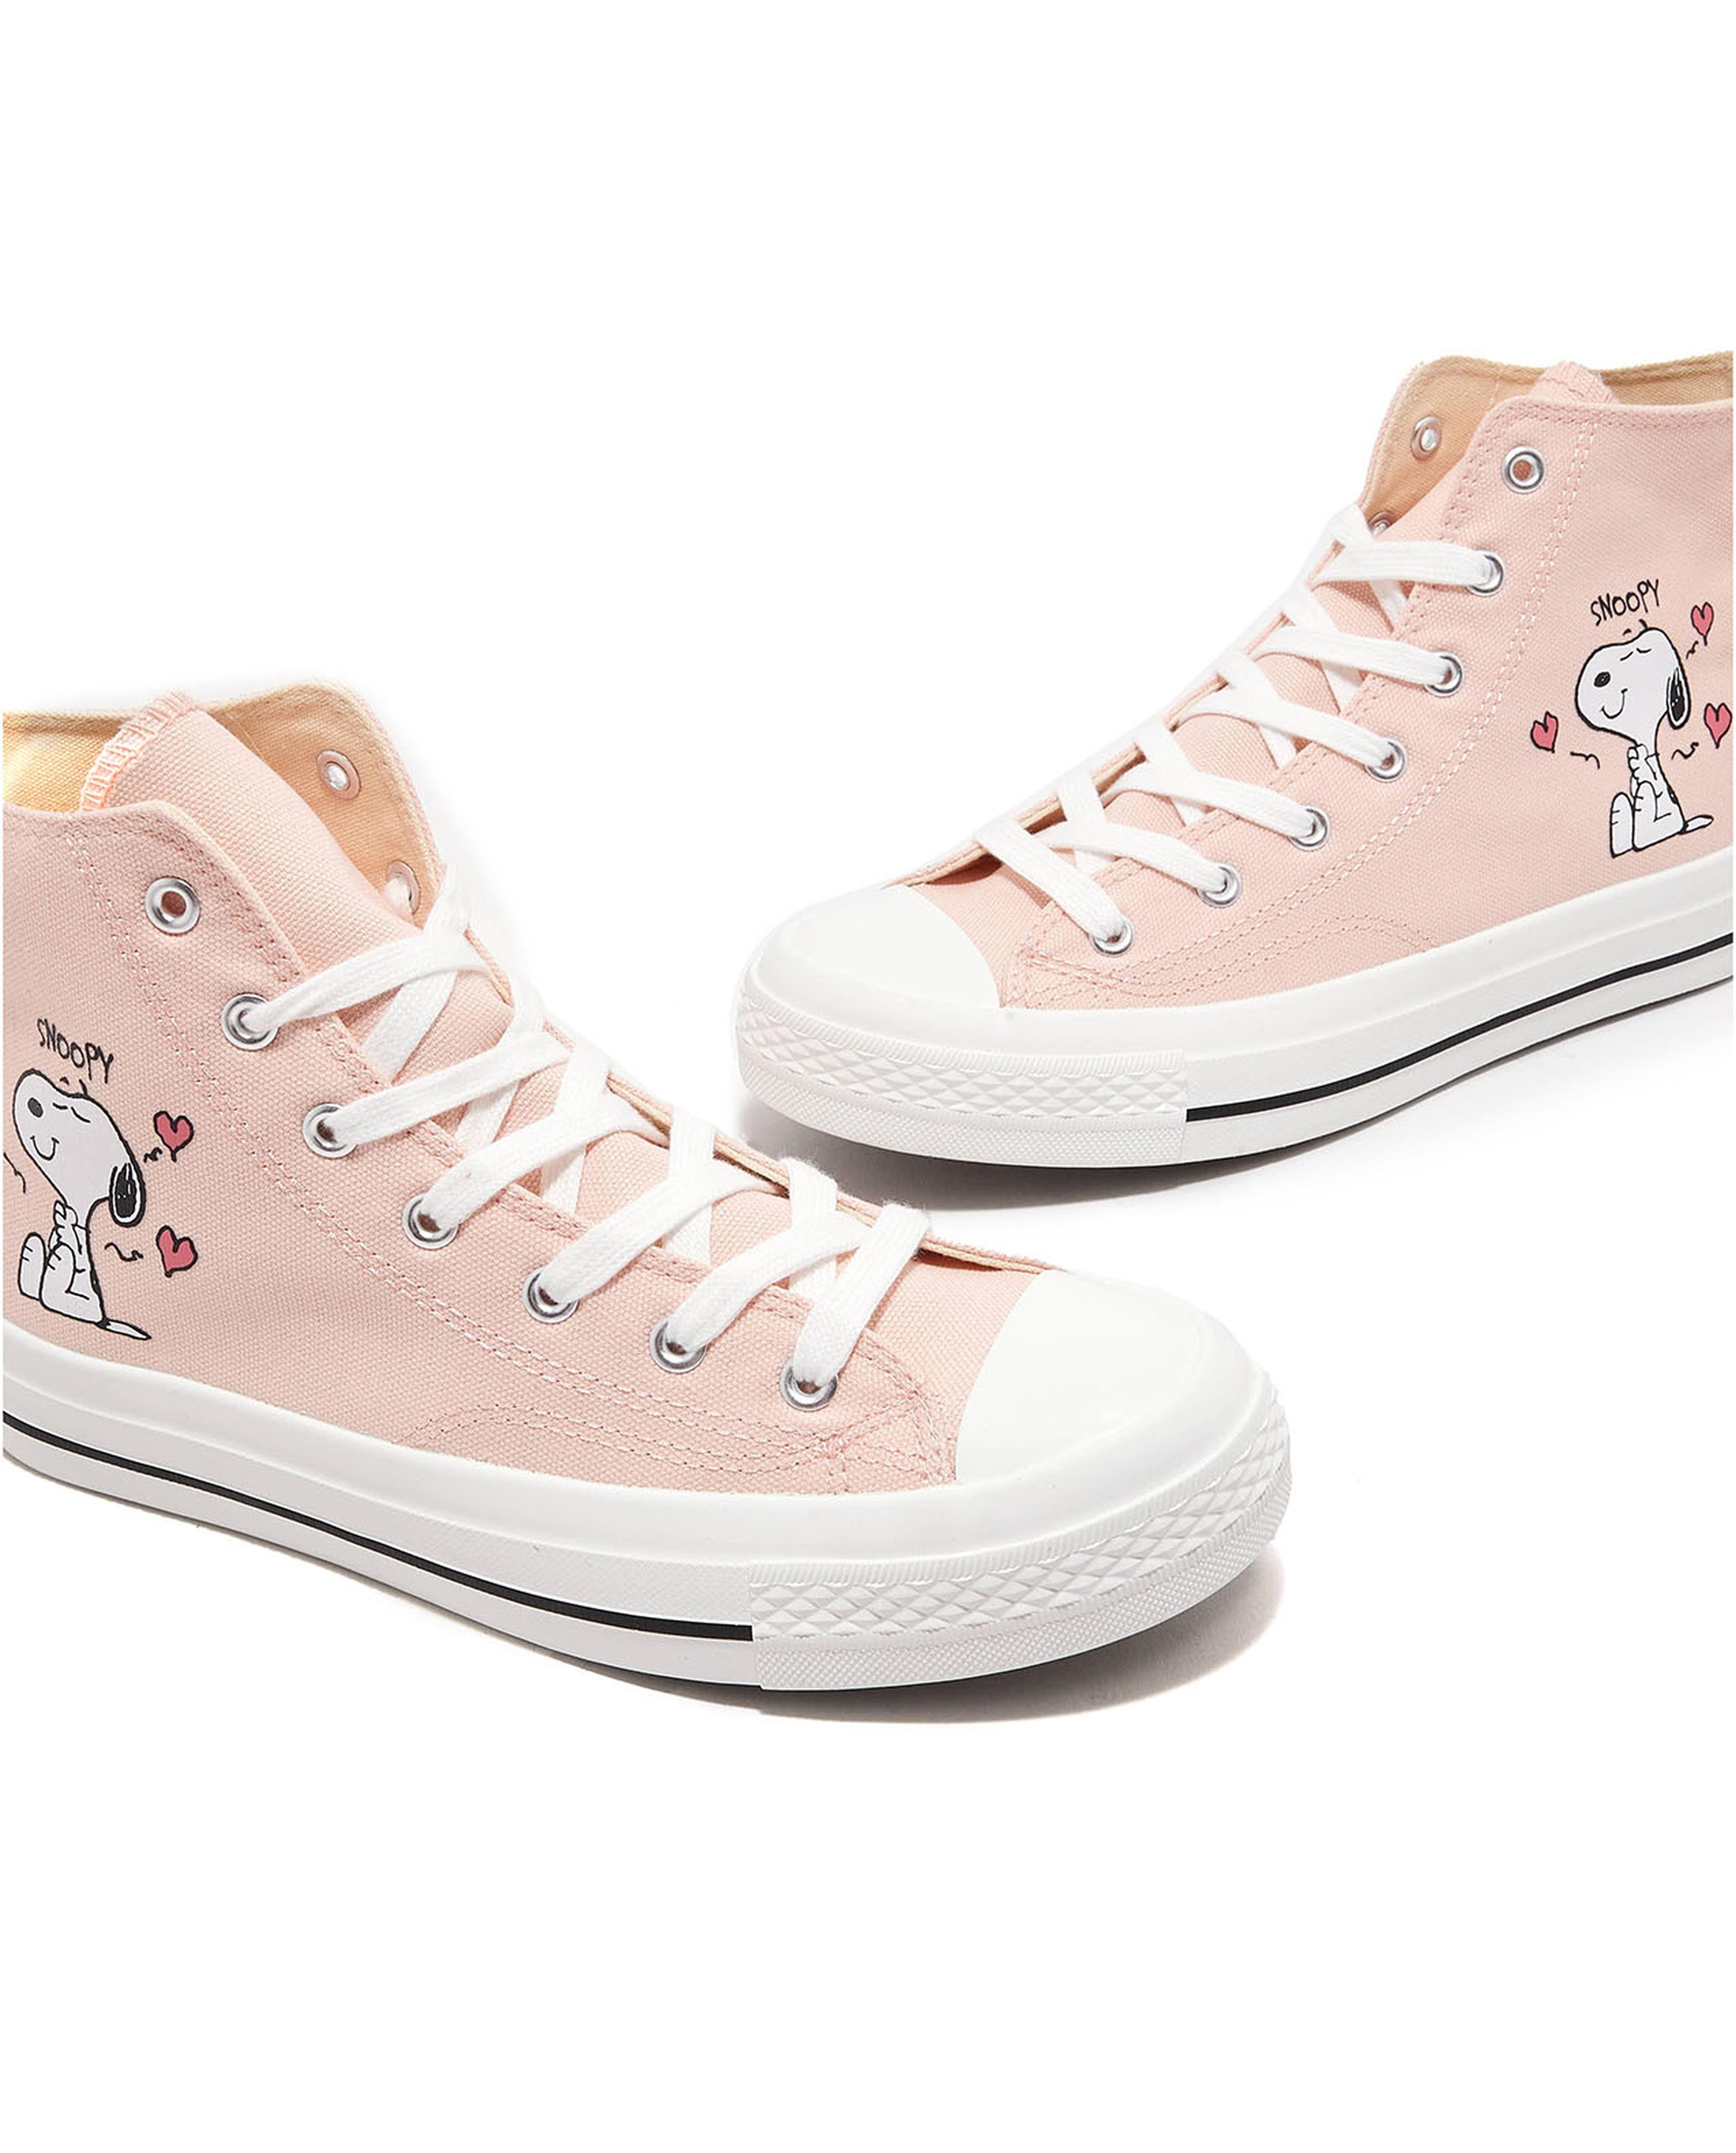 Snoopy Print High Top Canvas Shoes